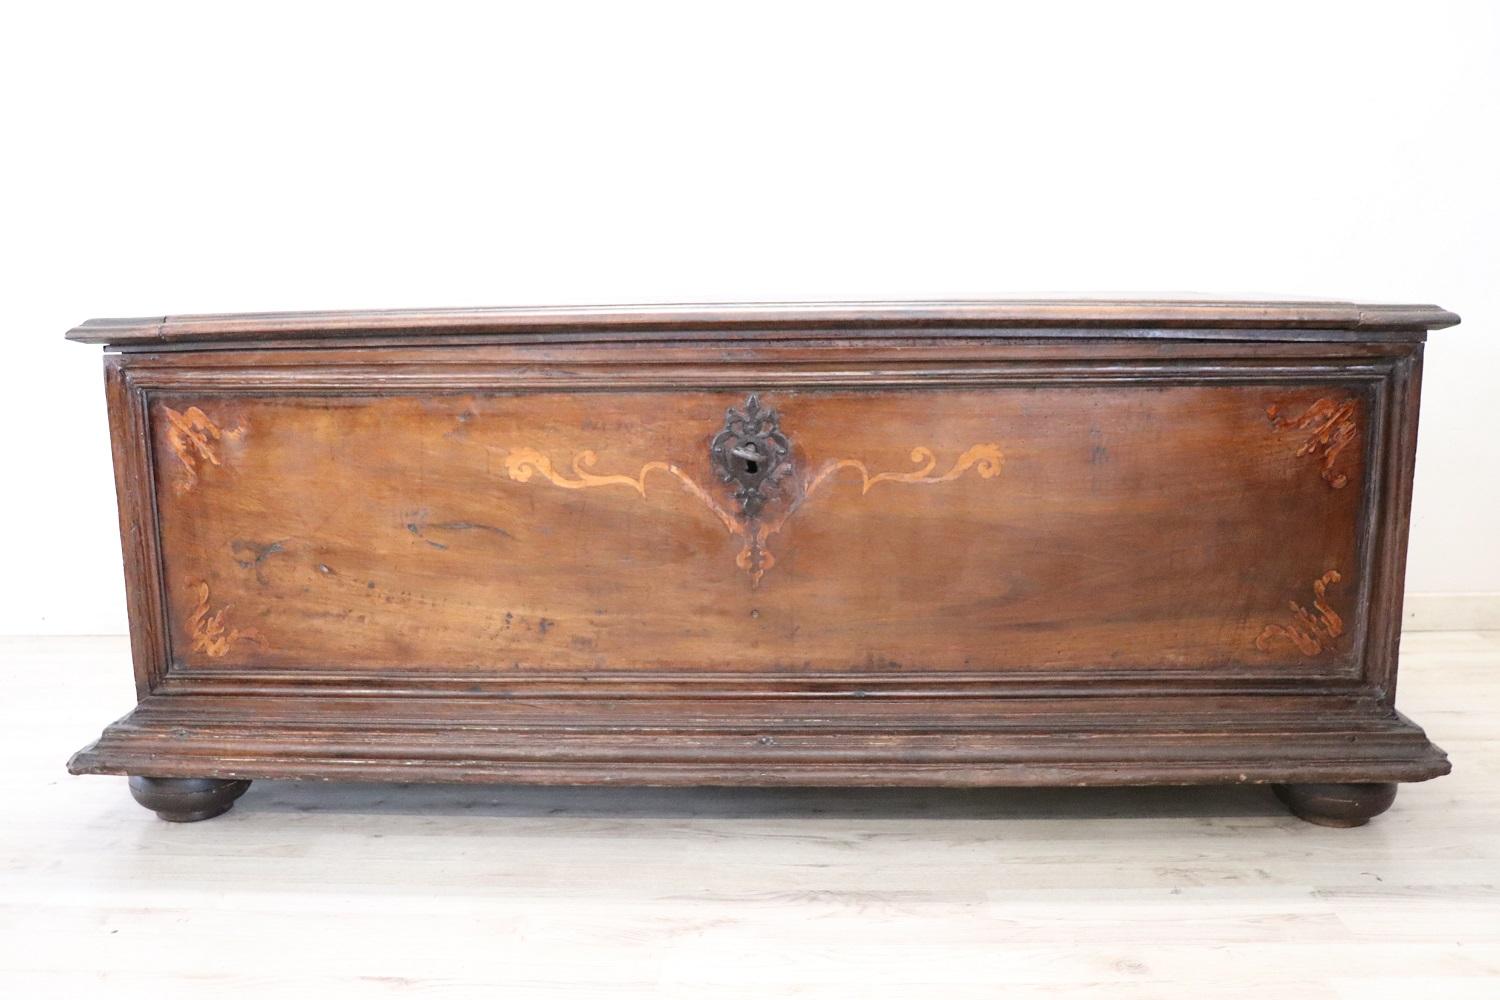 Beautiful antique blanket chest in solid walnut wood, 1650s. The antique blanket chest also completely original and has great charm. Characterized on the front by a simple inlay work in walnut wood. Internally equipped with a small drawer whose door